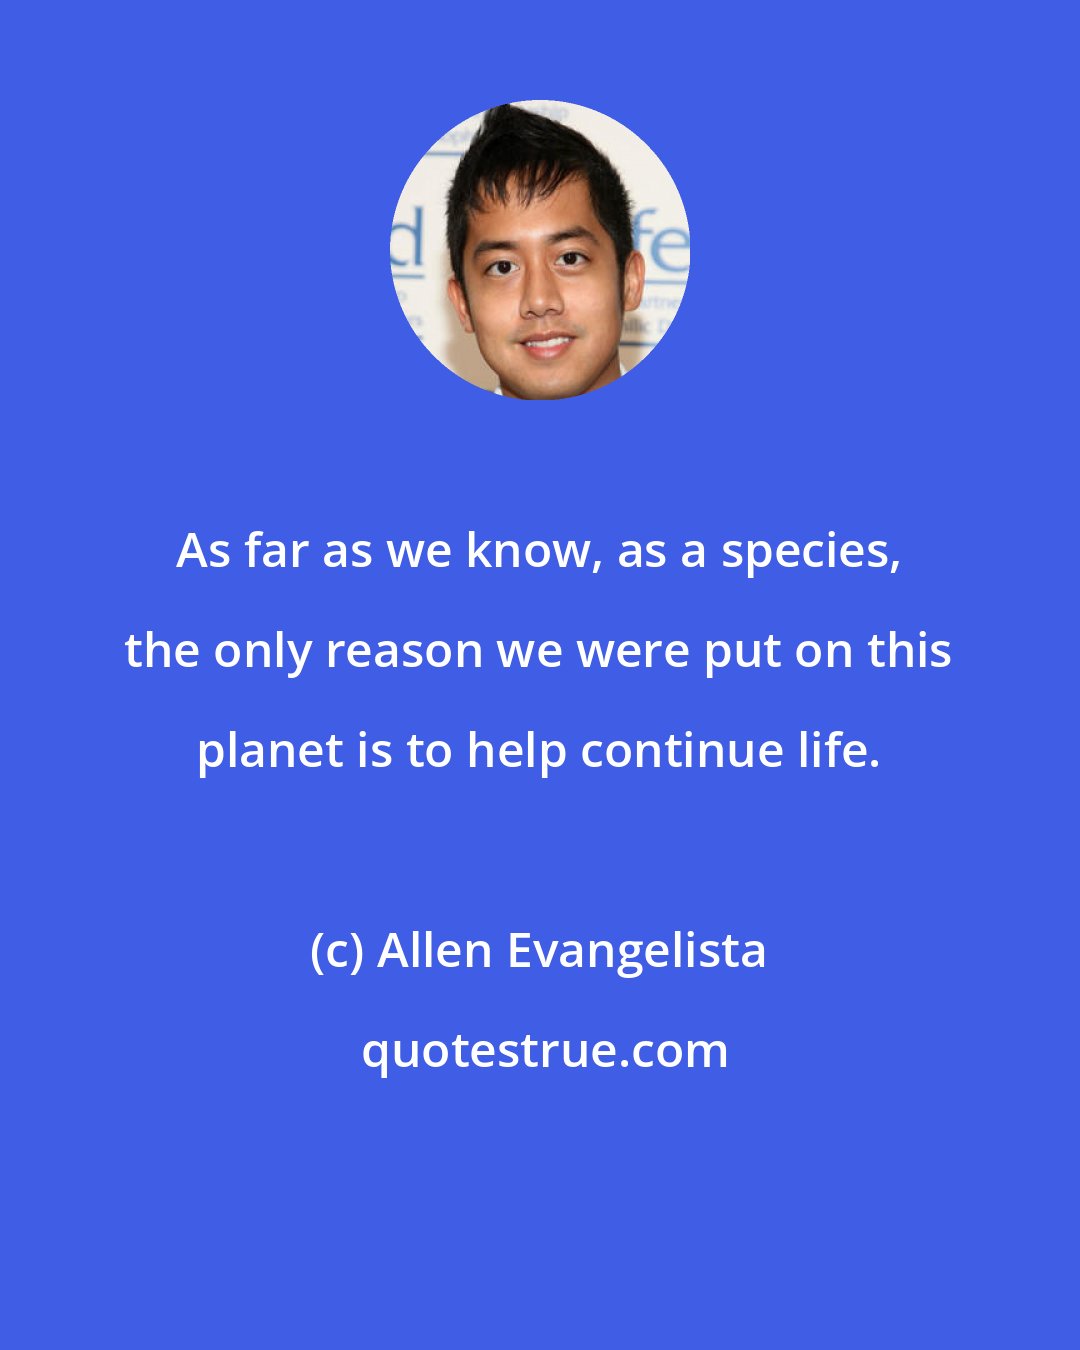 Allen Evangelista: As far as we know, as a species, the only reason we were put on this planet is to help continue life.